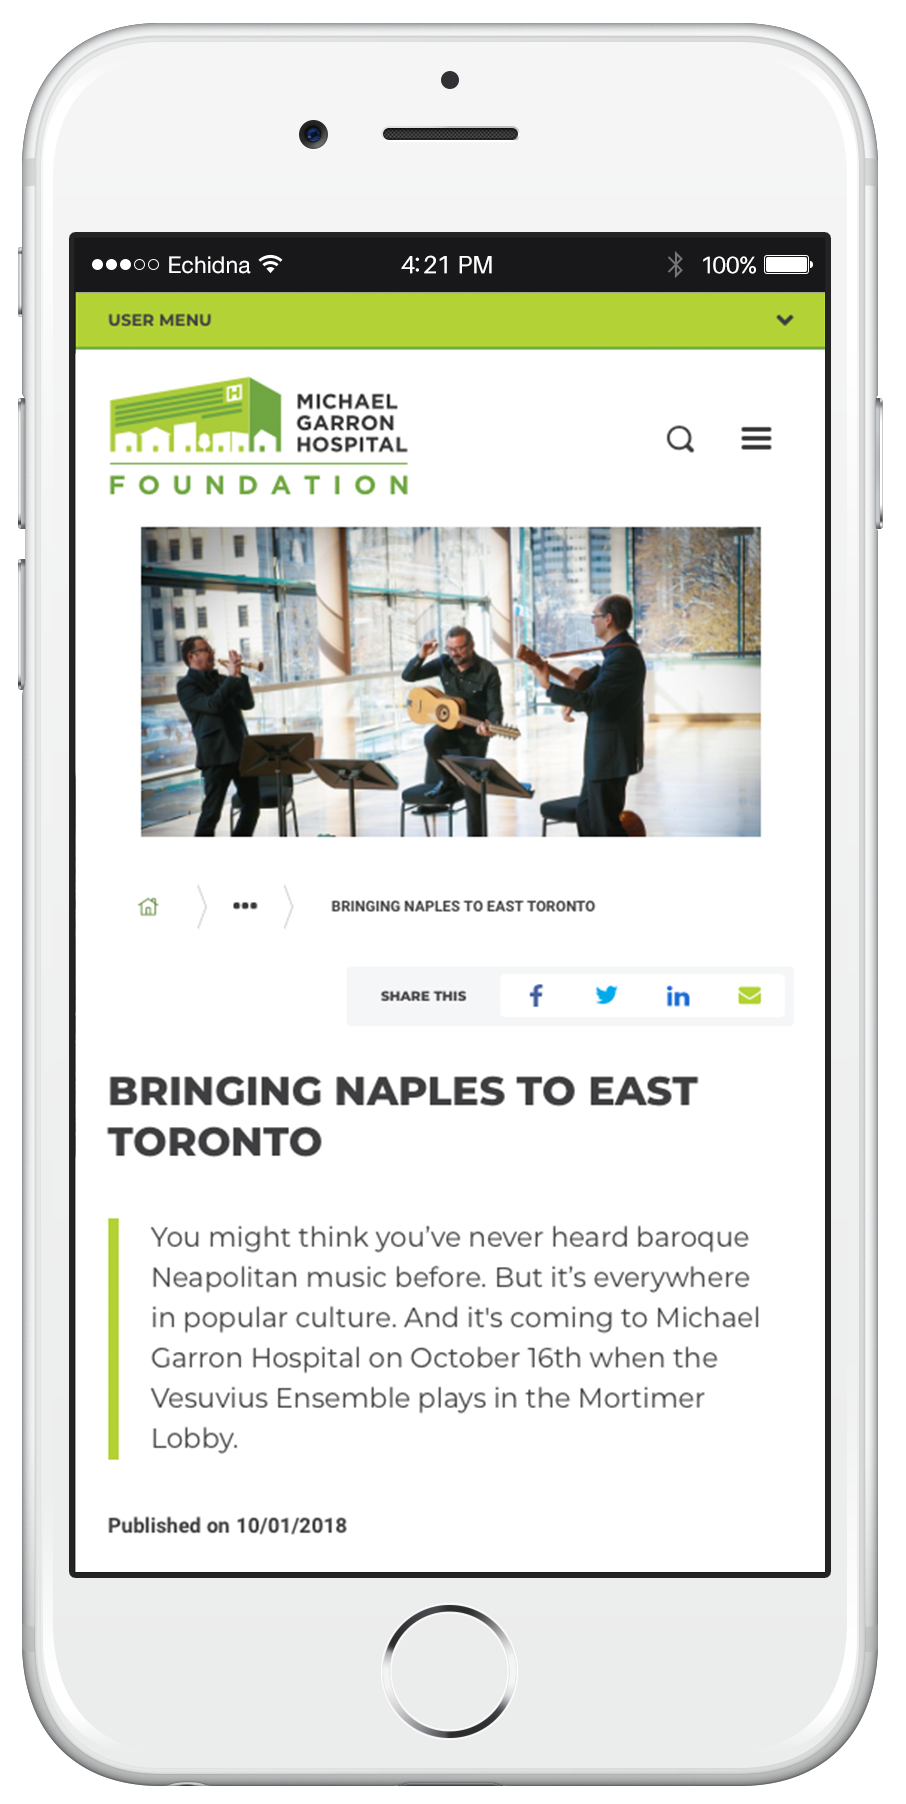 mgh foundation website on iphone